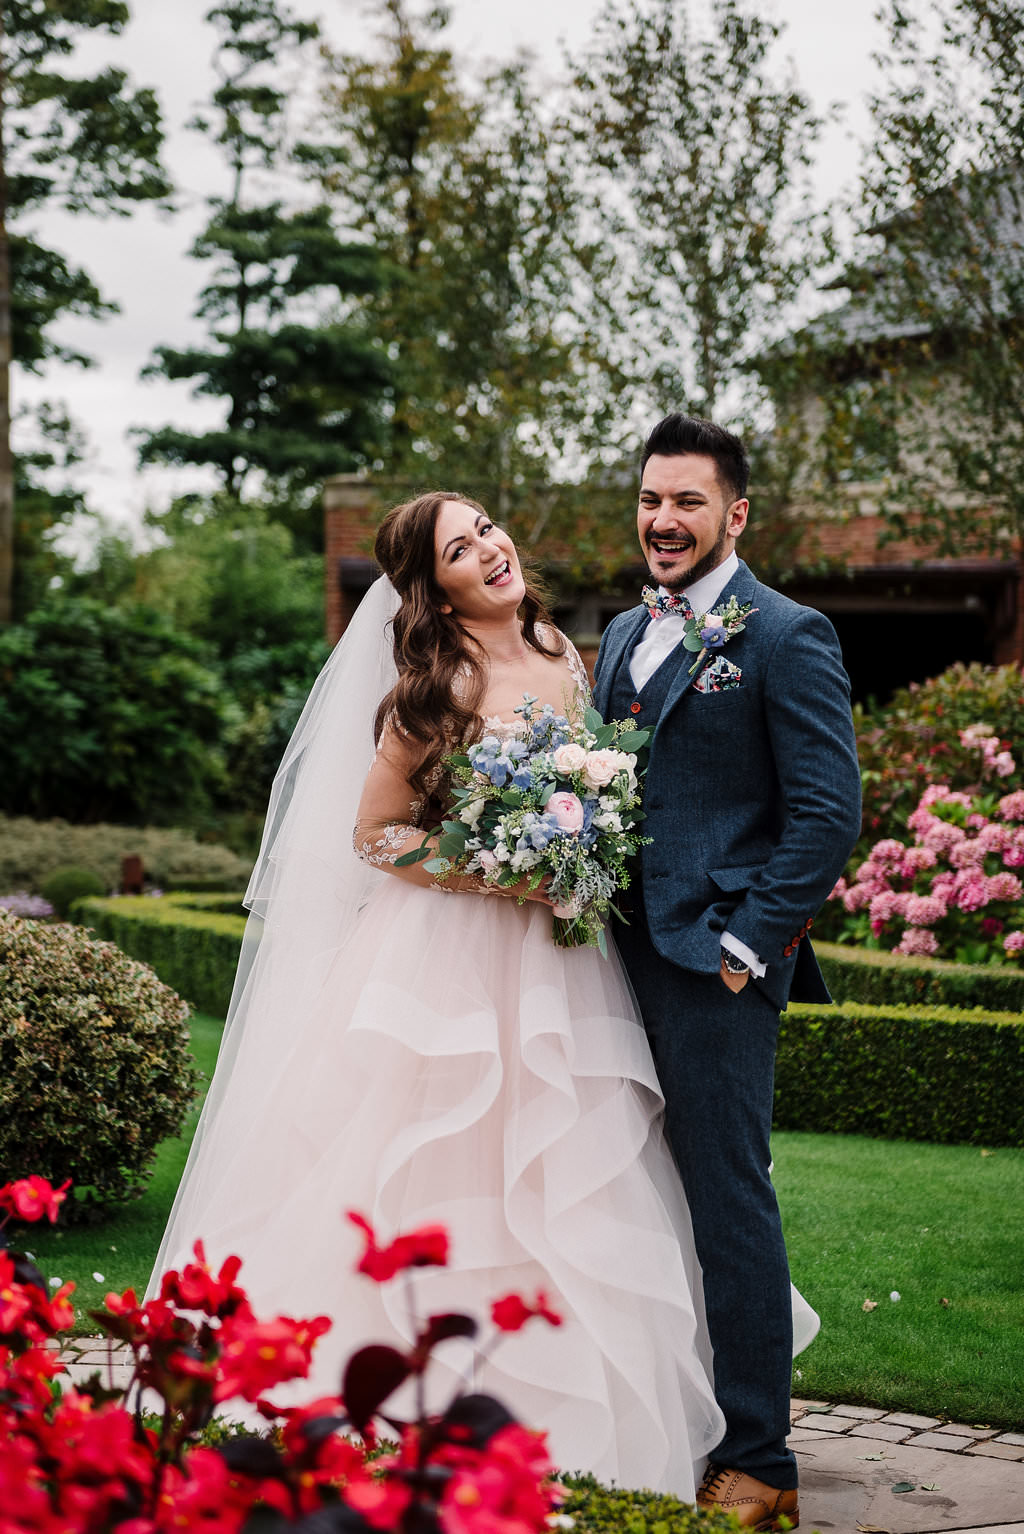 Colourful and relaxed portrait of bride and groom in the gardens at Stanley House Hotel.